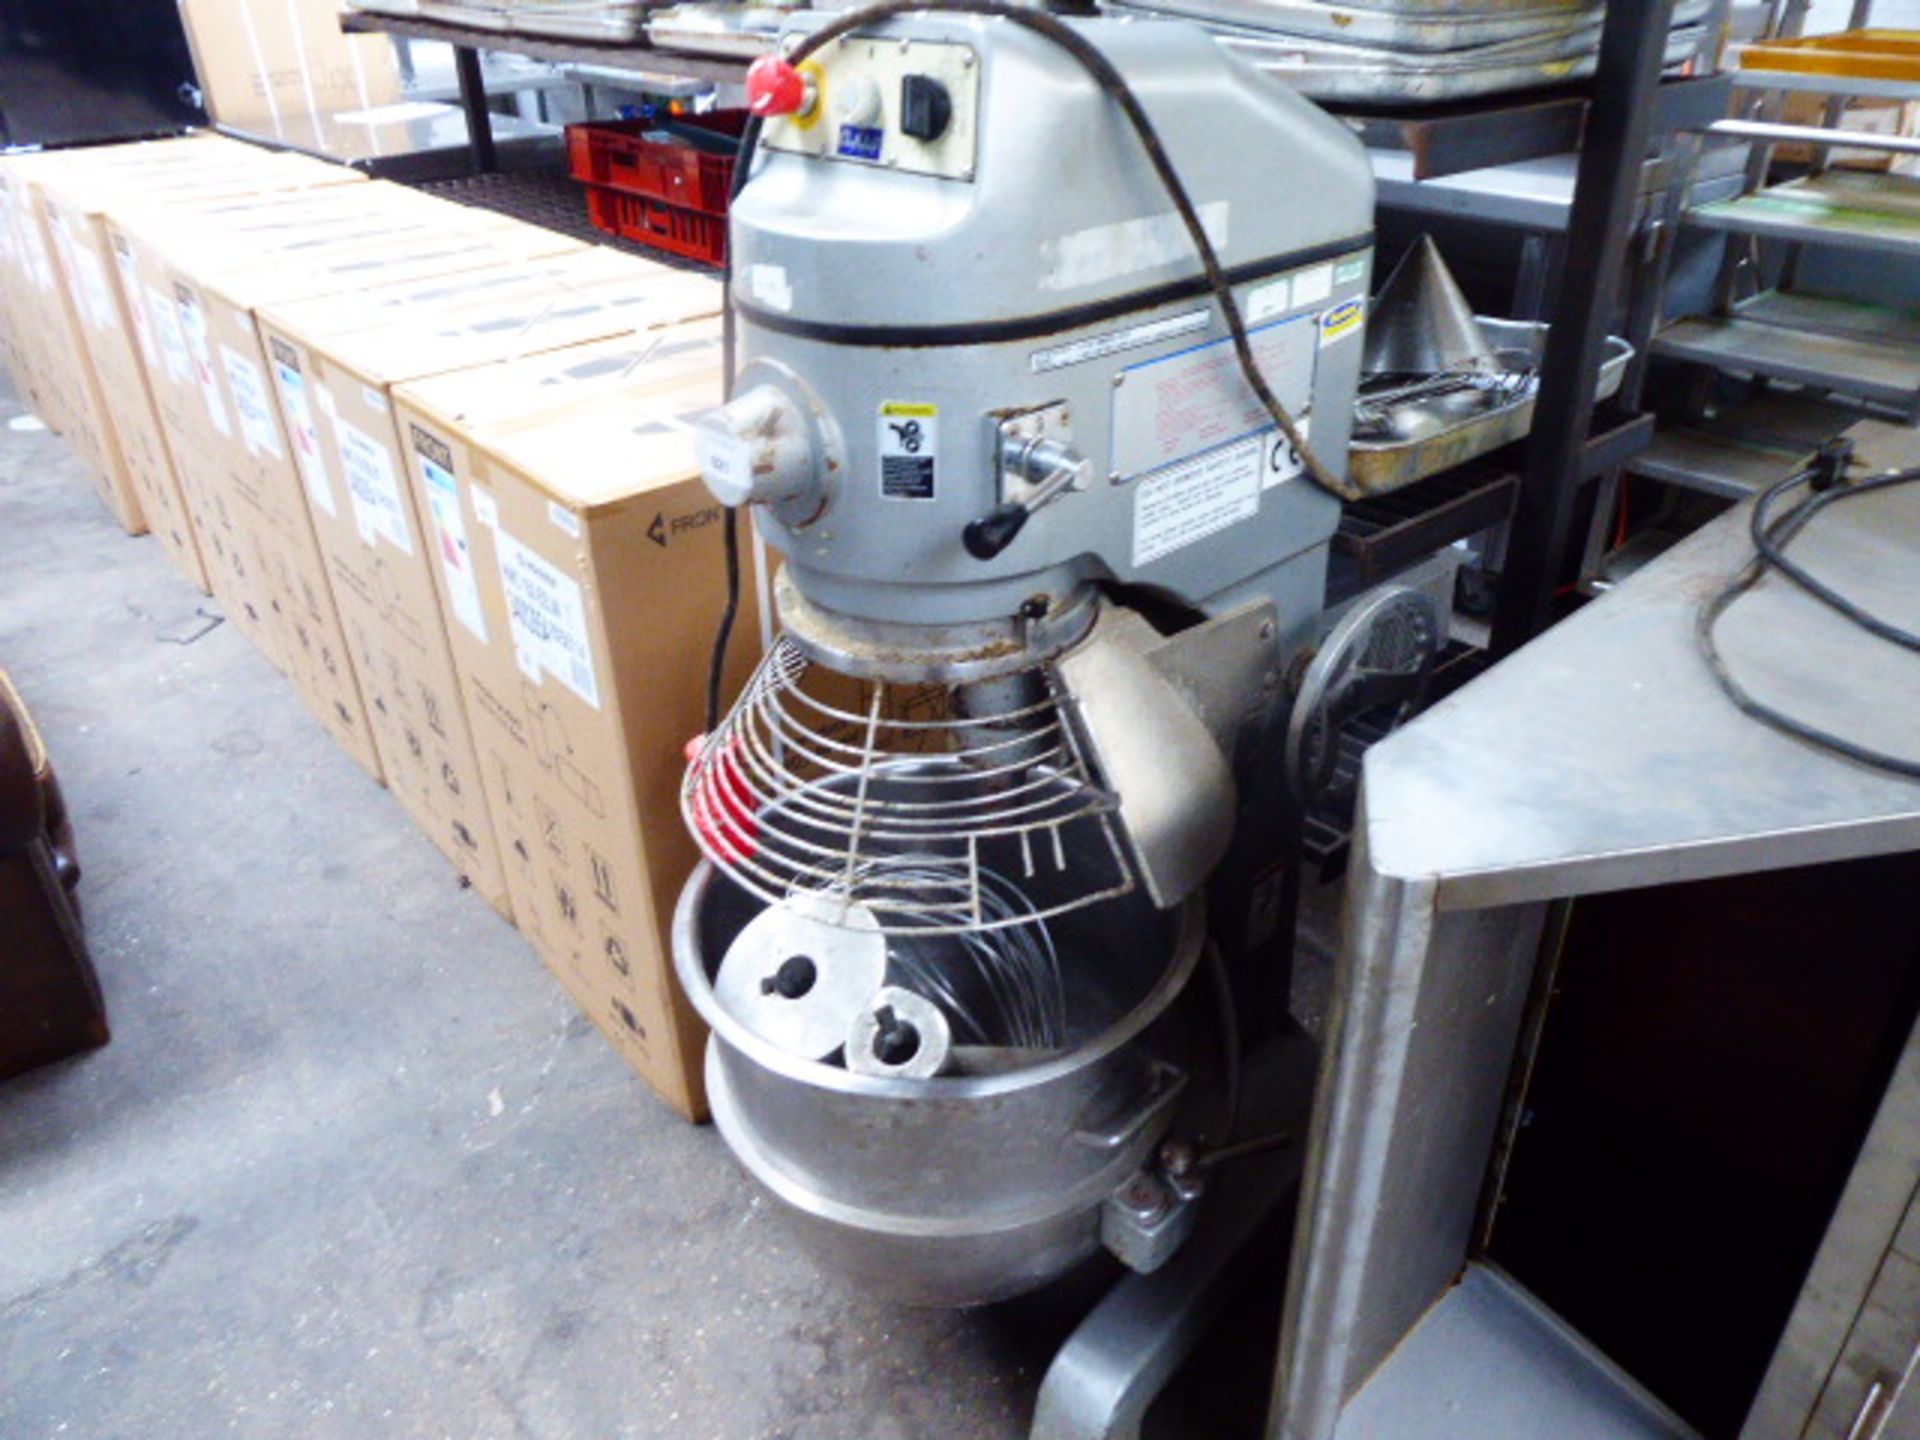 (133) ChefQuip large commercial mixer with bowl and 3 attachments